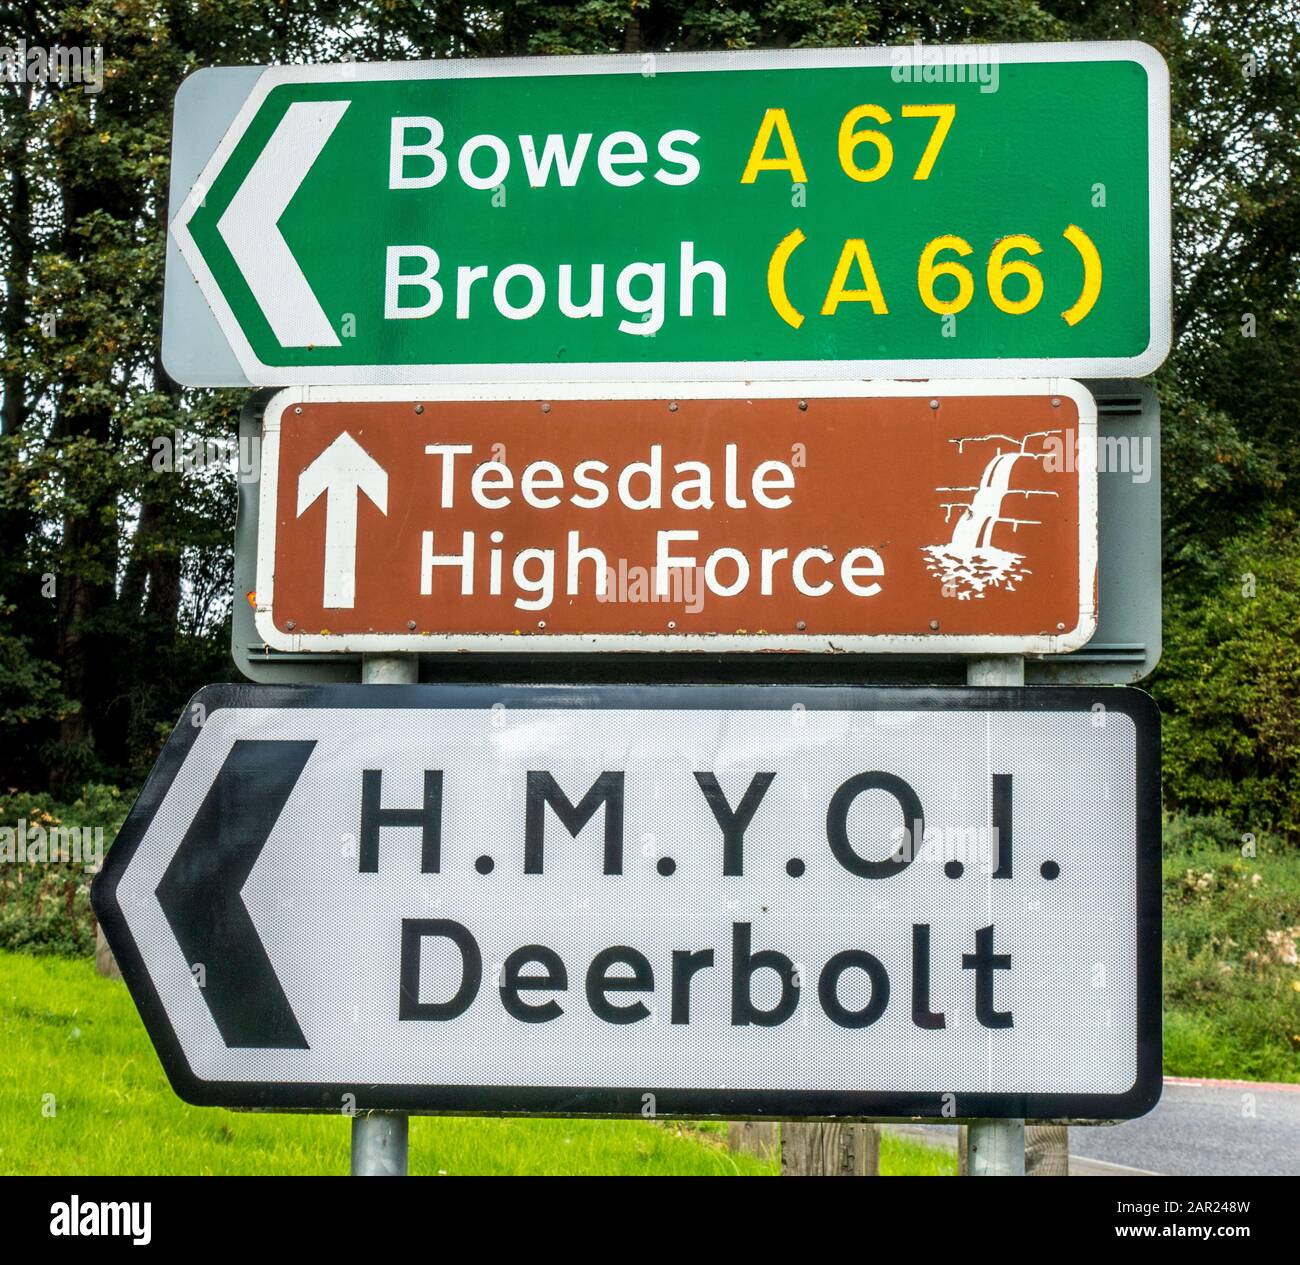 Three direction road signs for Bowes, A67, Brough, A66, Teesdale High Force and H.M.Y.O.I. Deerbolt. Located in Teesdale, County Durham, England, UK. Stock Photo